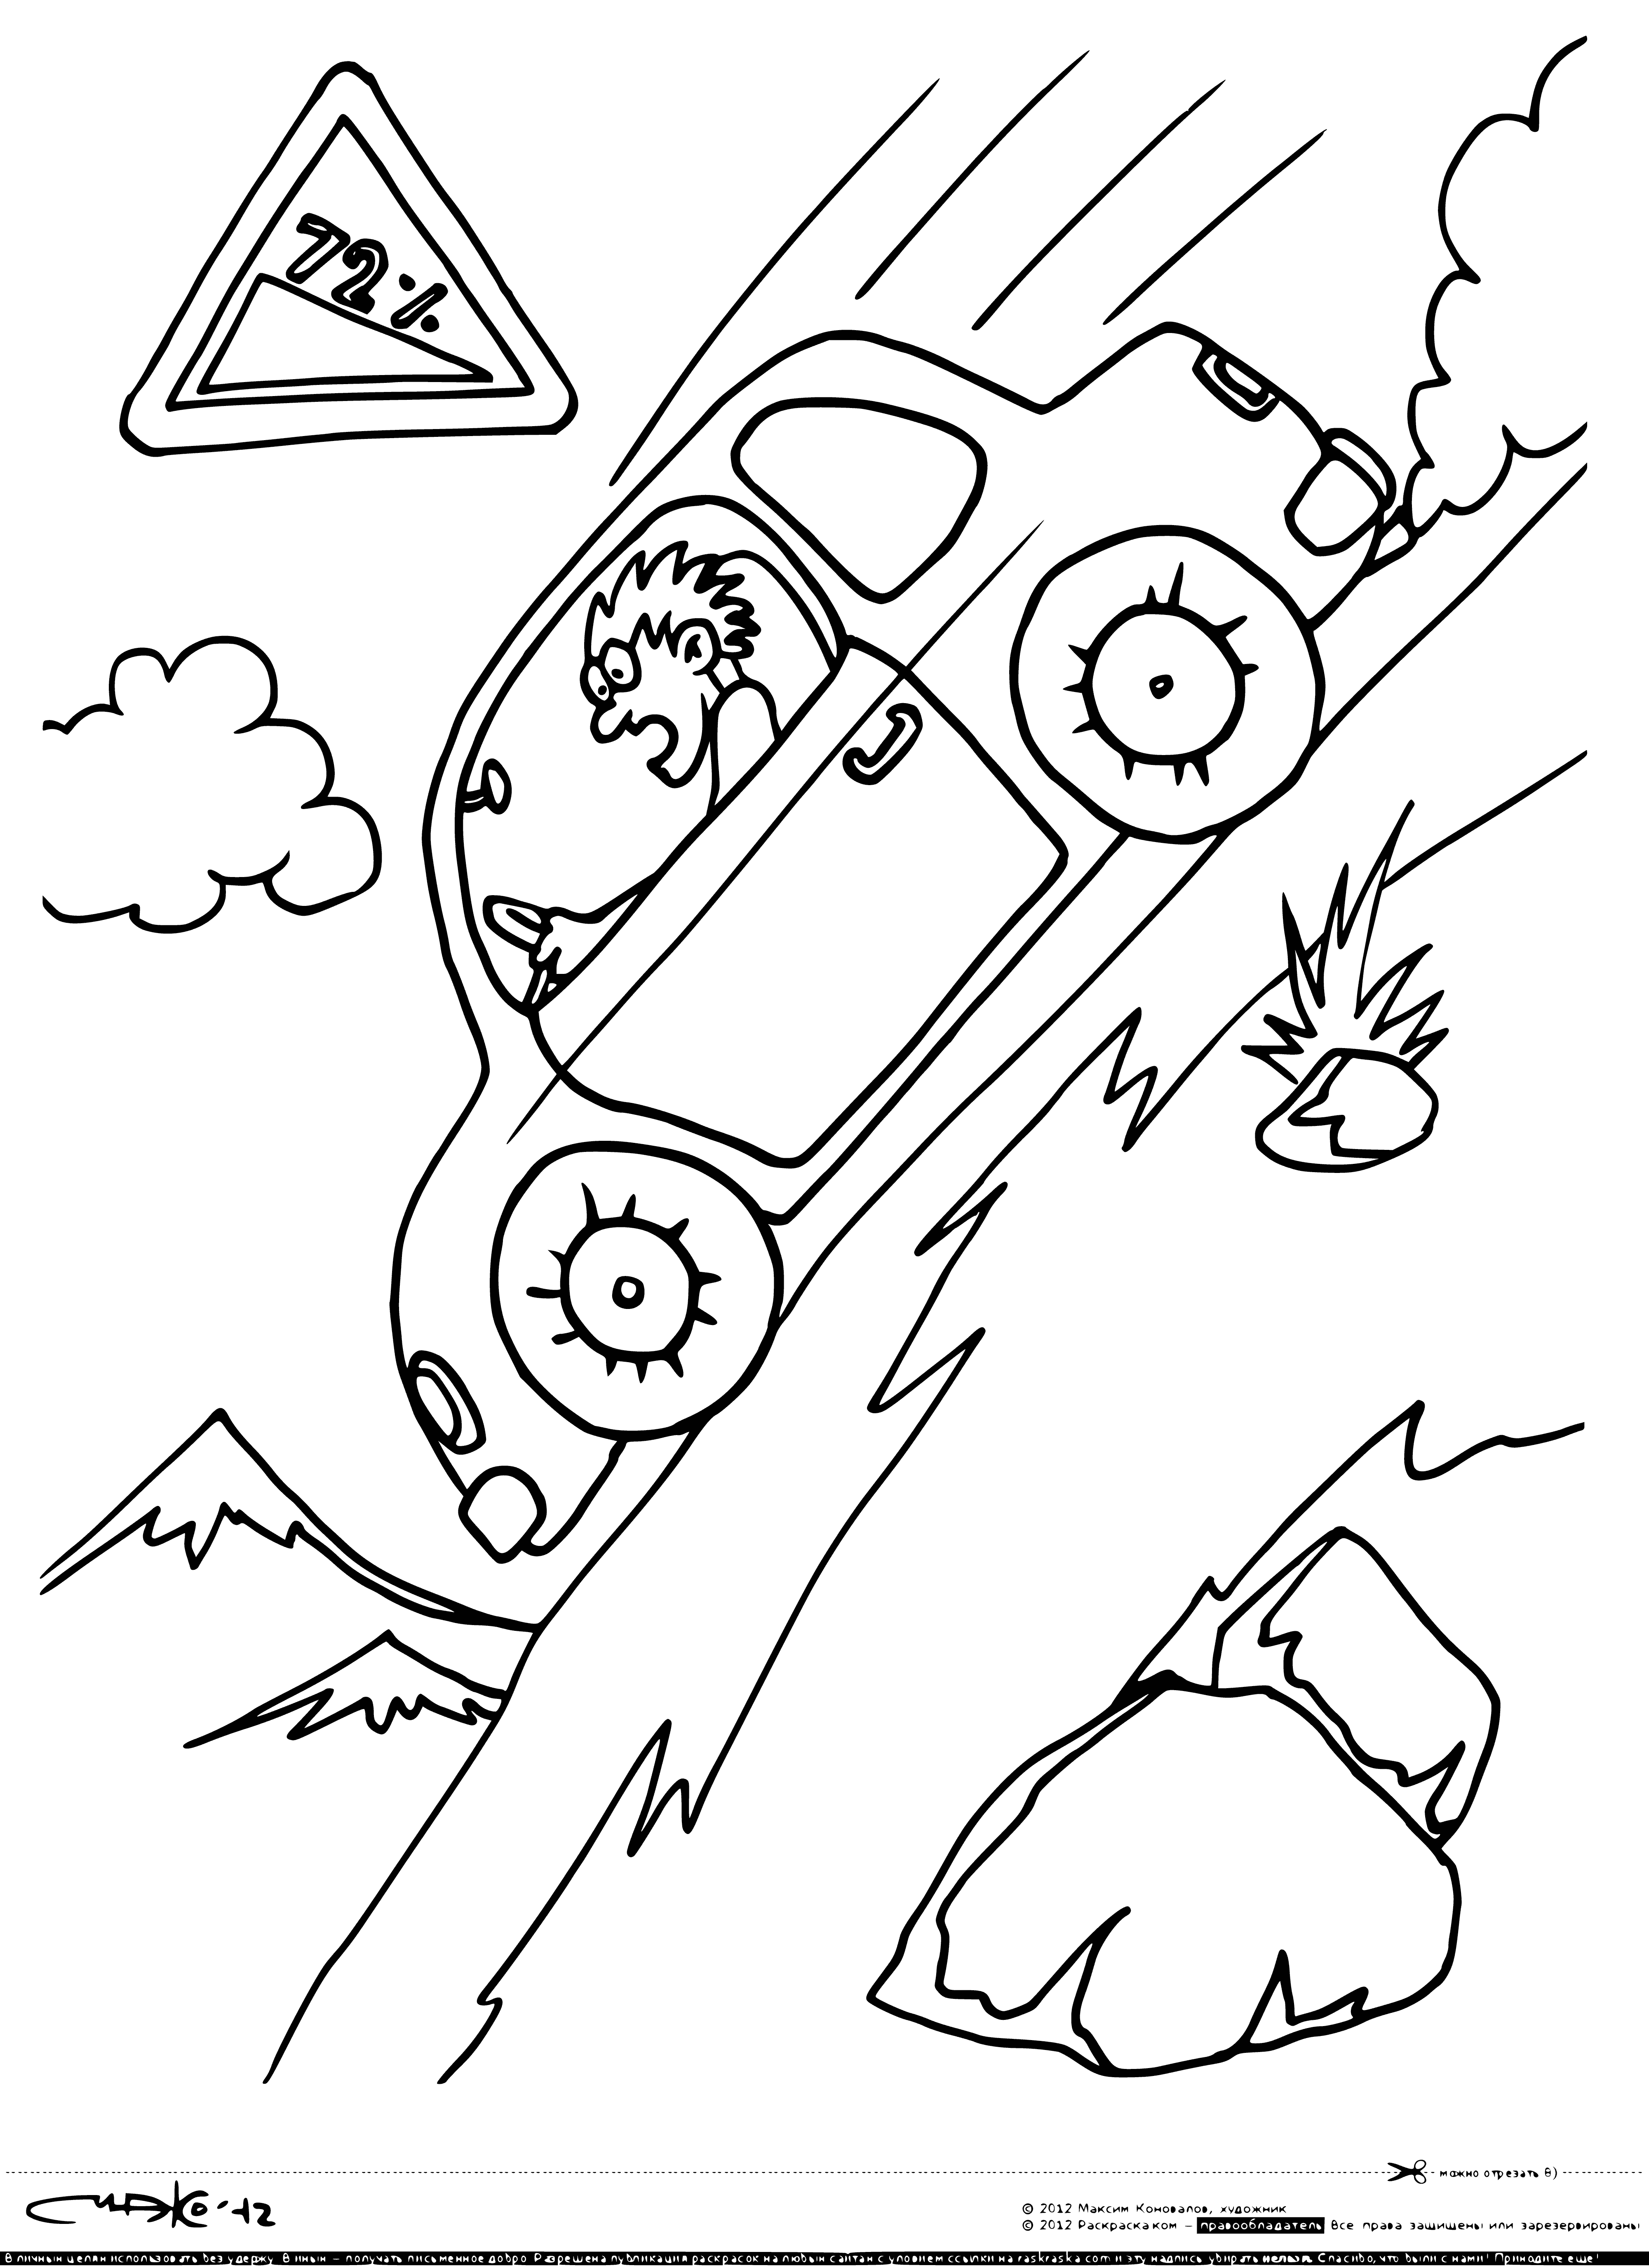 coloring page: Sign reads "Steep Descent" w/ yellow bg & black coloring page of car going down hill; arrow points down beneath sign.